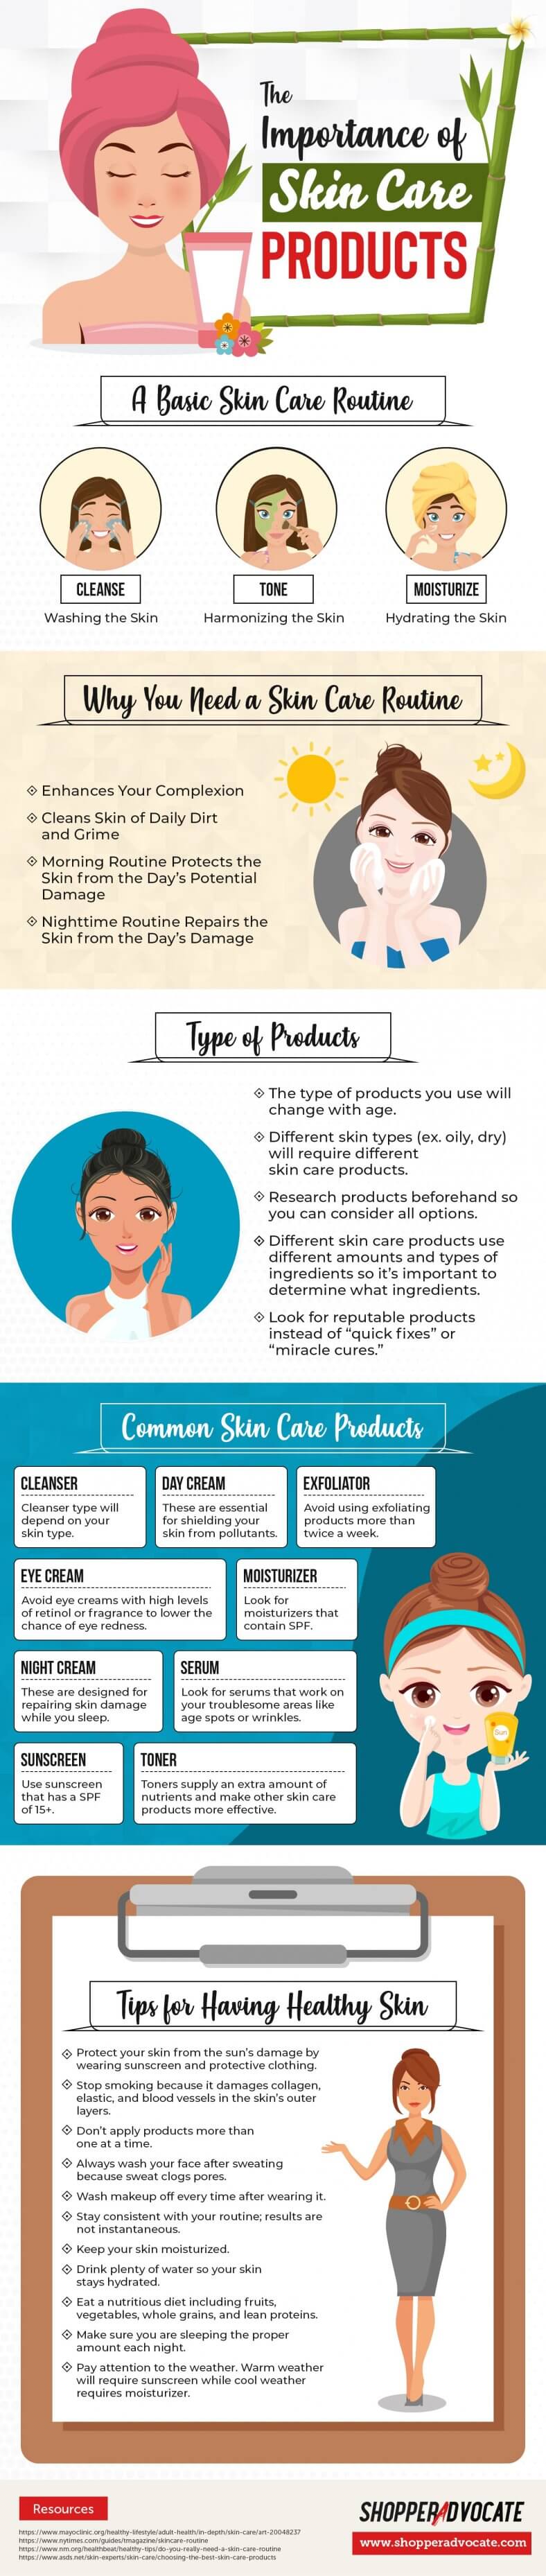 The Importance of Skin Care Products